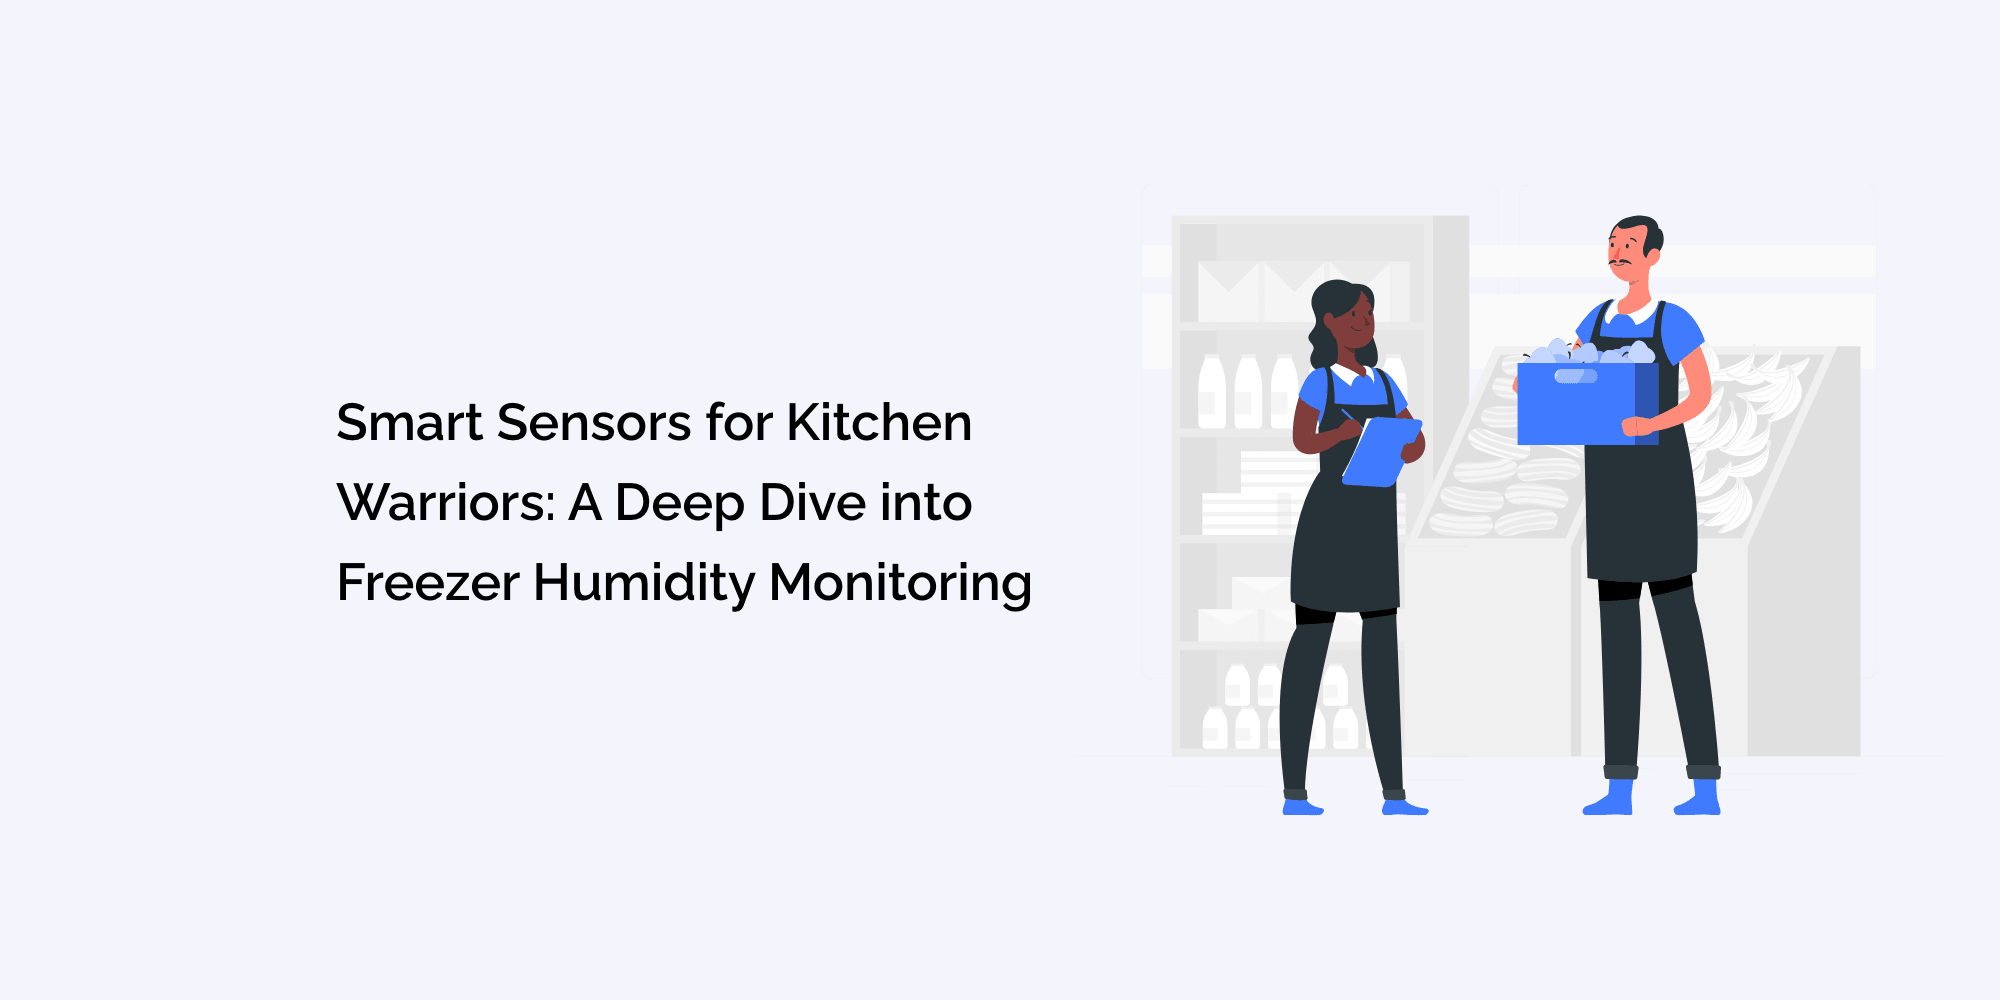 Smart Sensors for Kitchen Warriors: A Deep Dive into Freezer Humidity Monitoring